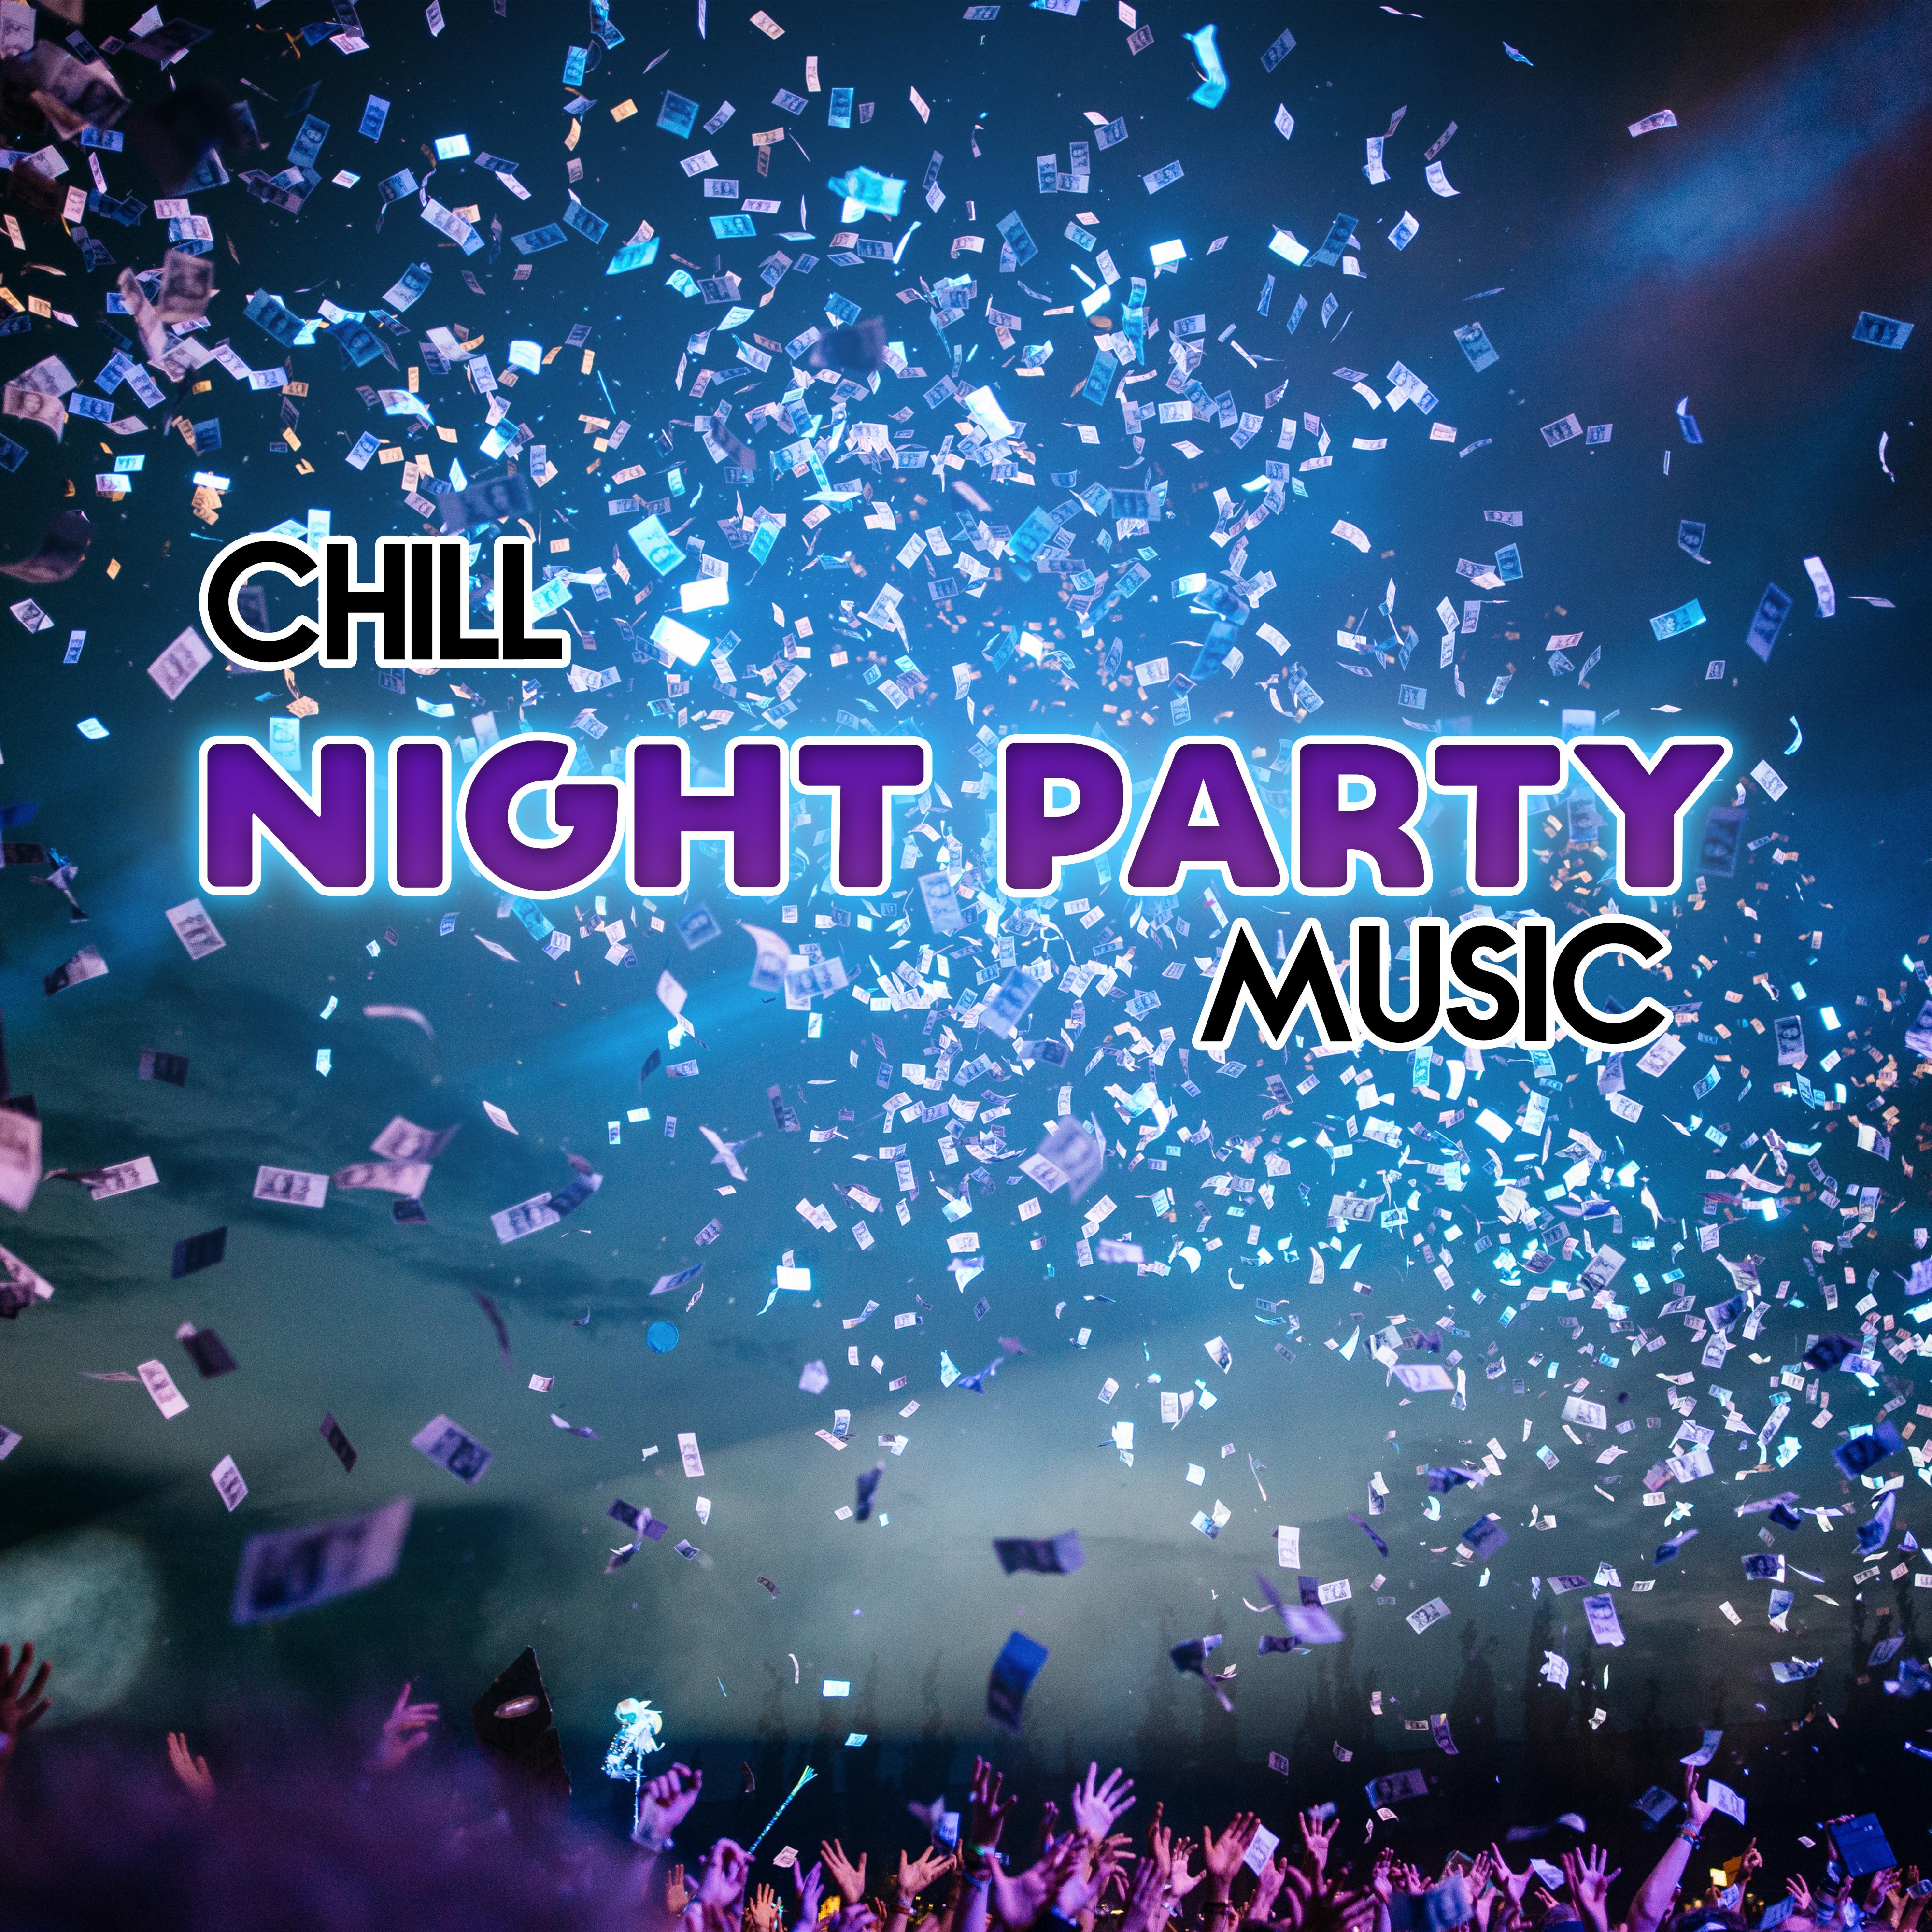 Chill Out Night Party Music – Ibiza Party Time, Chill Out Beats All Night, Beach Dancefloor, Cocktails & Drinks